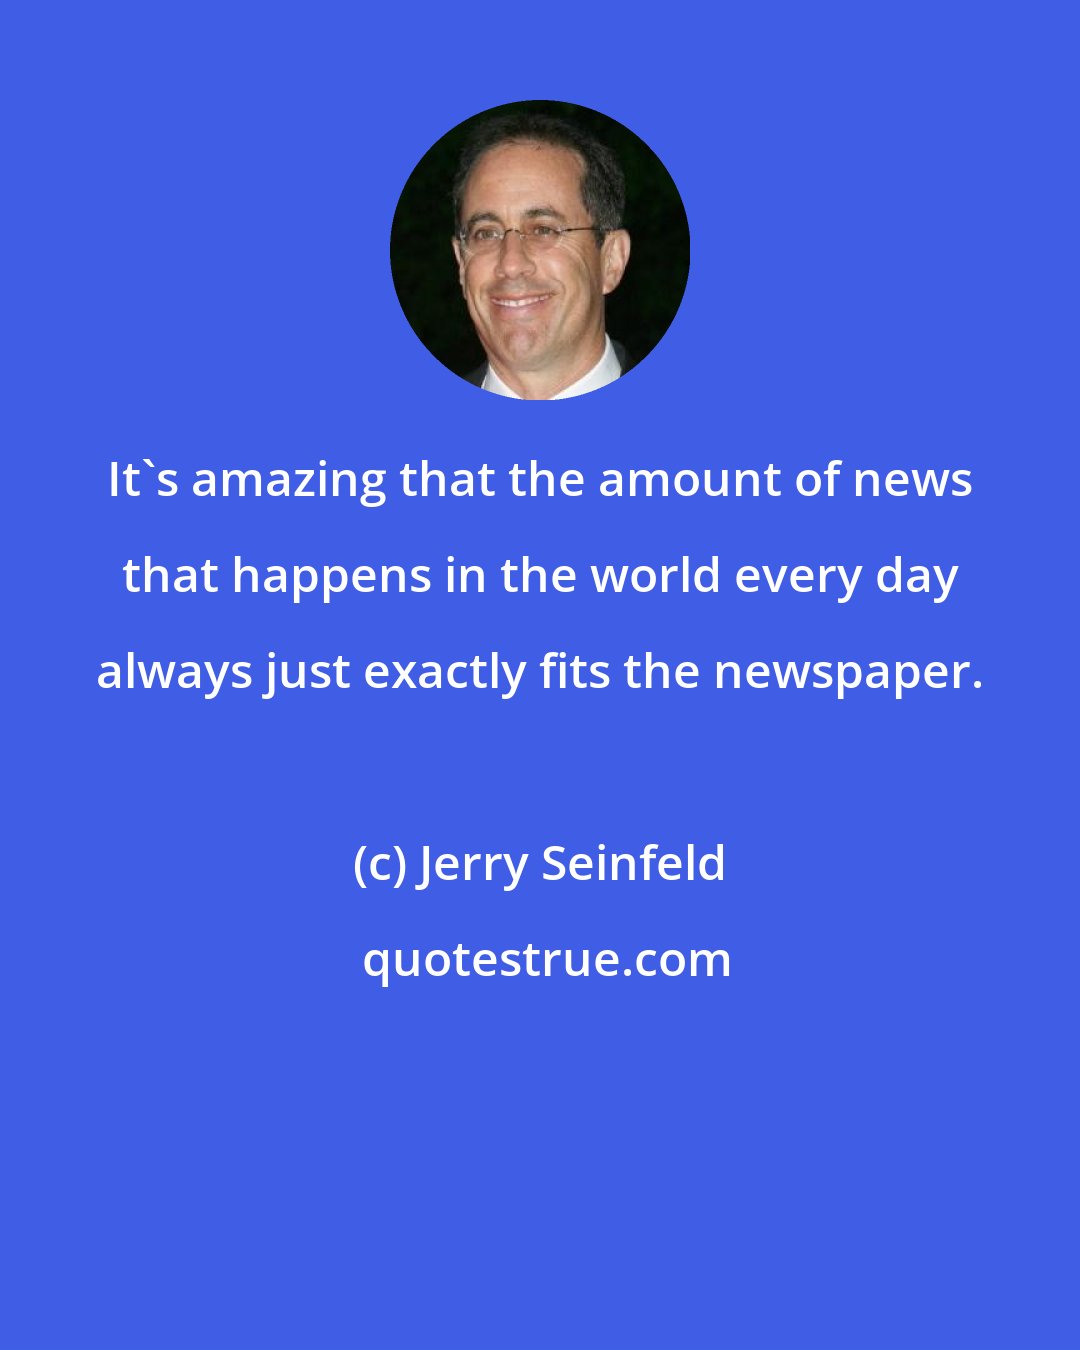 Jerry Seinfeld: It's amazing that the amount of news that happens in the world every day always just exactly fits the newspaper.